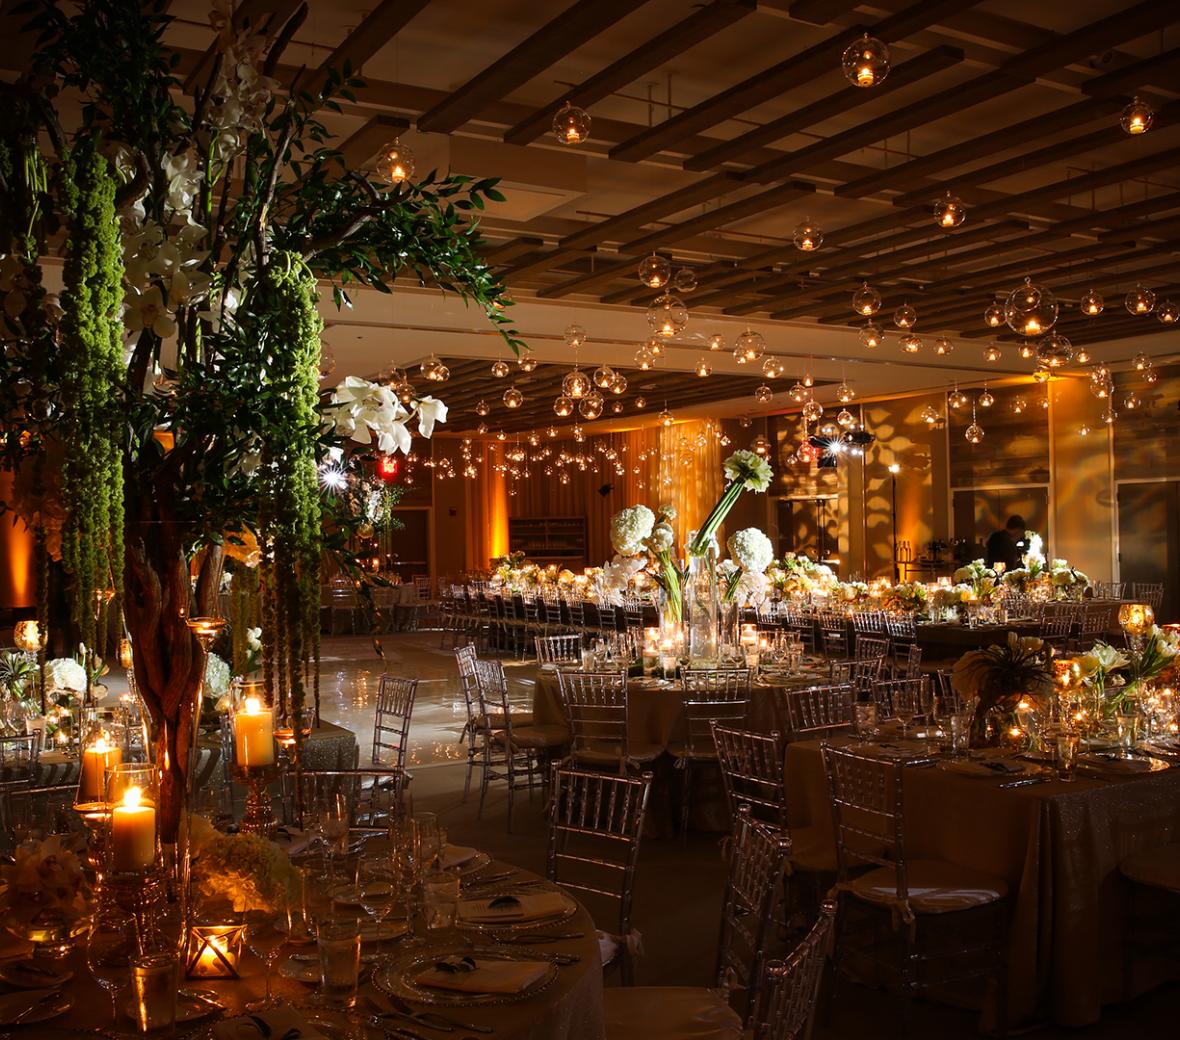 A luxury venue in a hotel with tables  decorated with floral arrangements and candles.